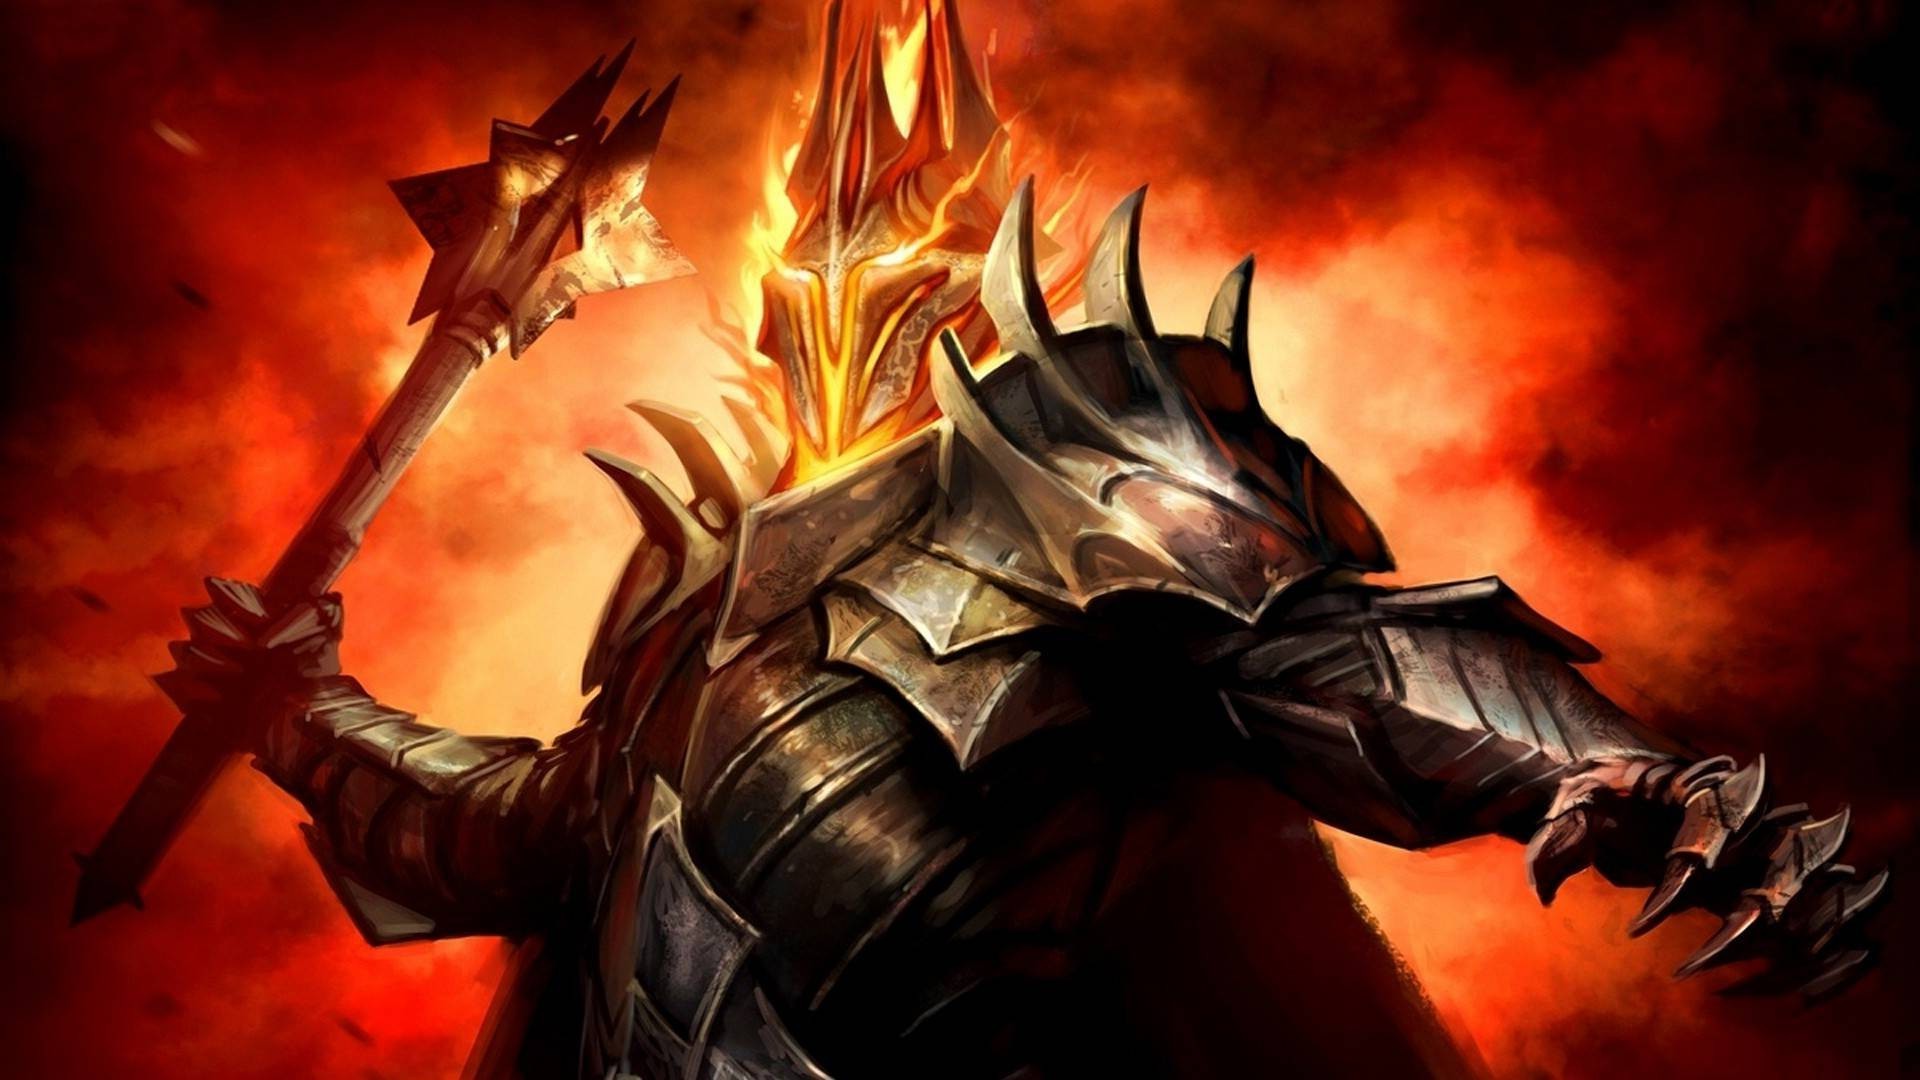 Sauron, The Lord Of The Rings Wallpaper